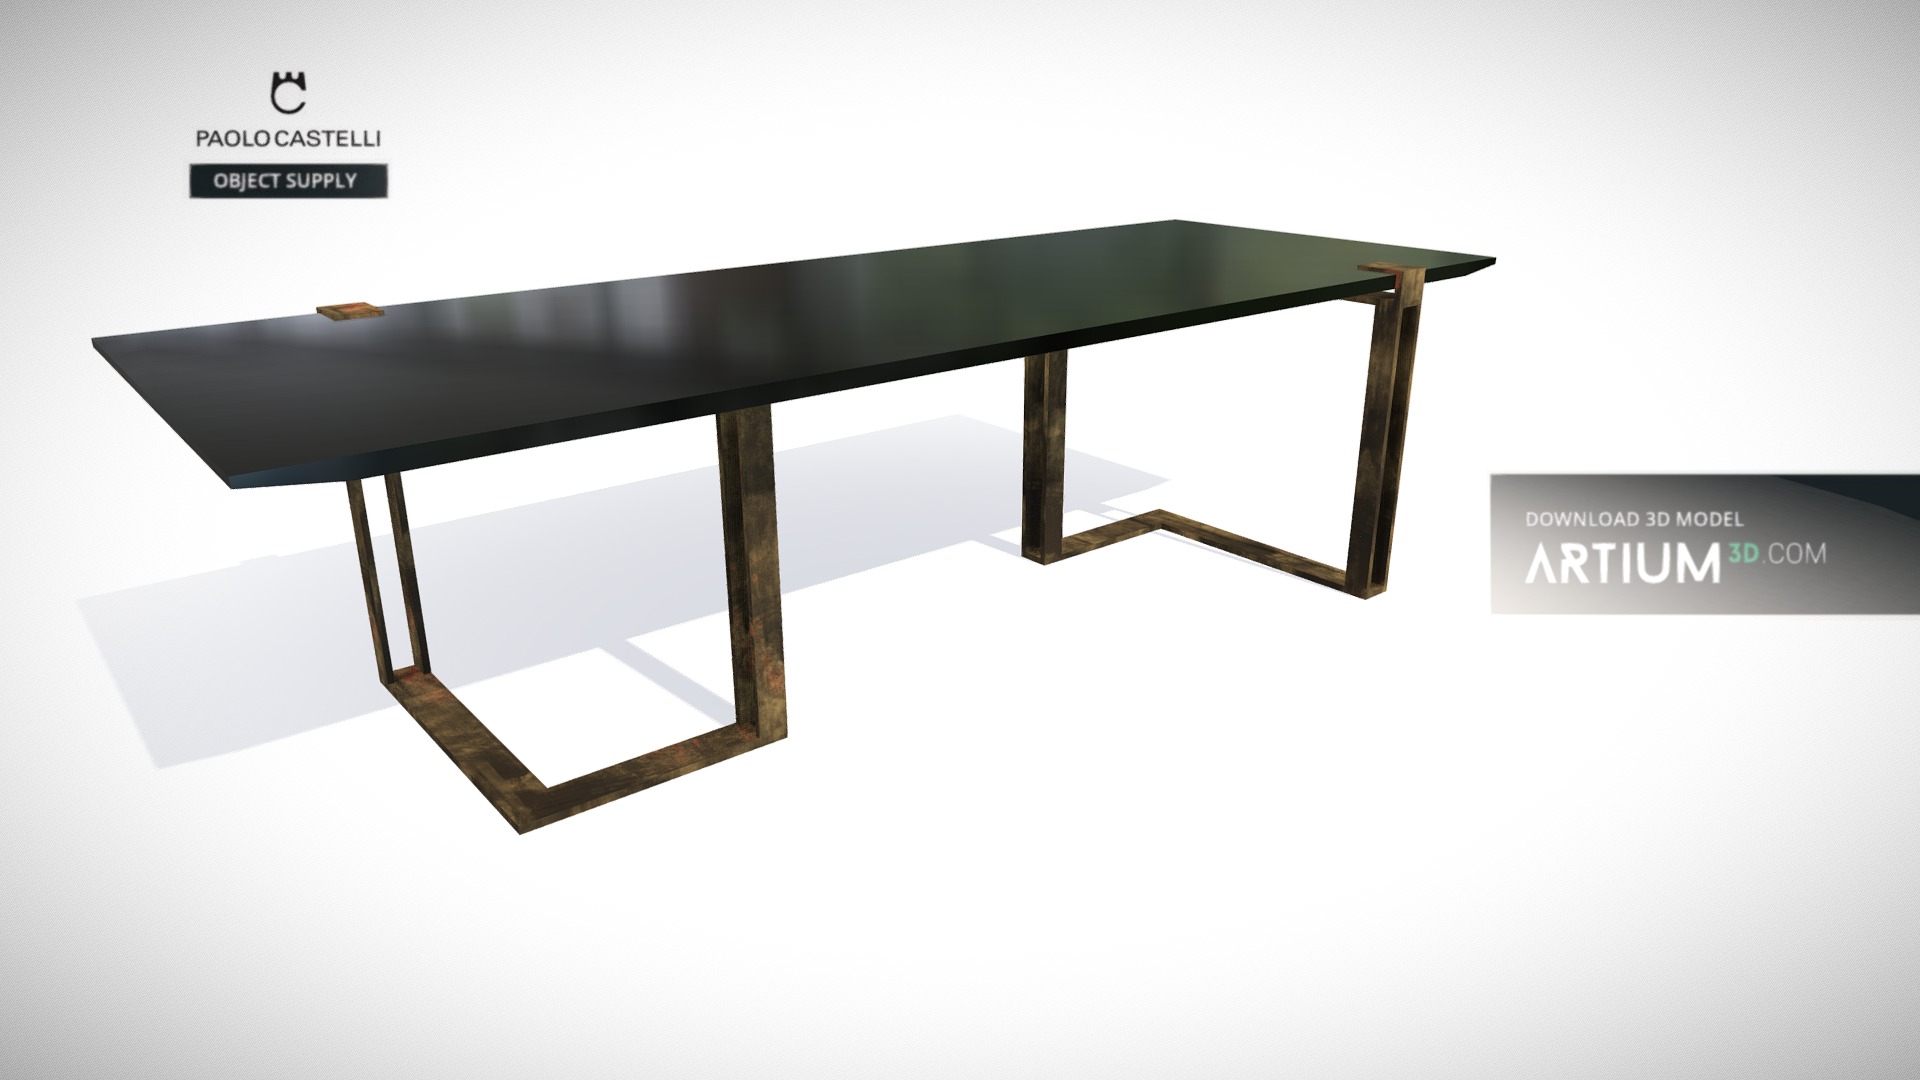 3D model Black&Gold Table from Paolo Castelli - This is a 3D model of the Black&Gold Table from Paolo Castelli. The 3D model is about a table with a bench.